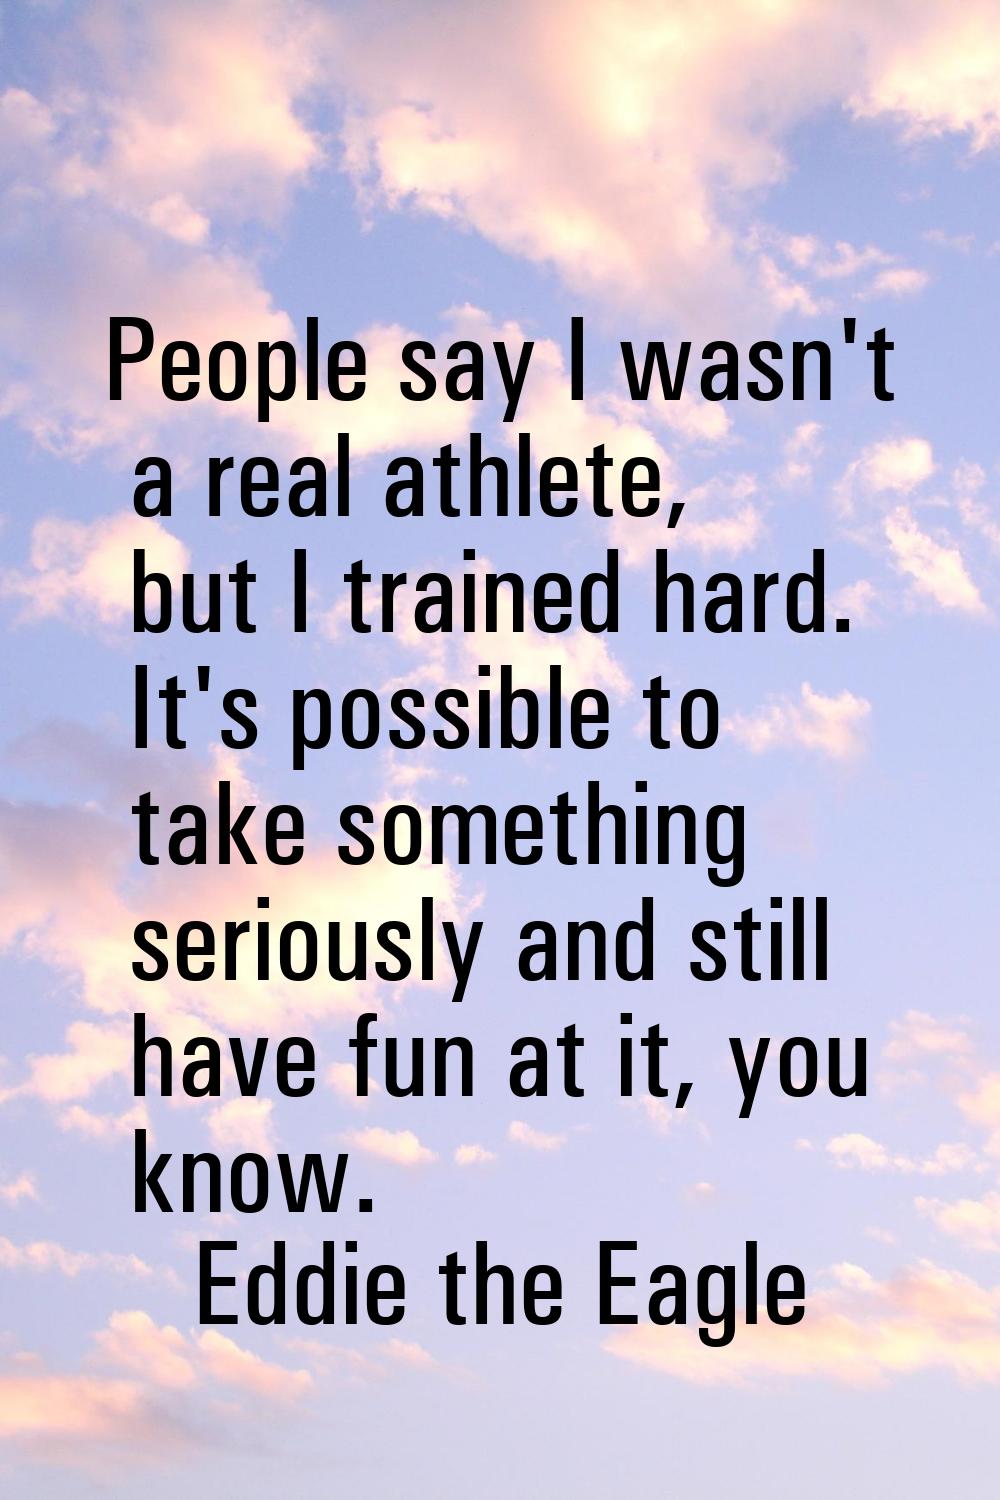 People say I wasn't a real athlete, but I trained hard. It's possible to take something seriously a